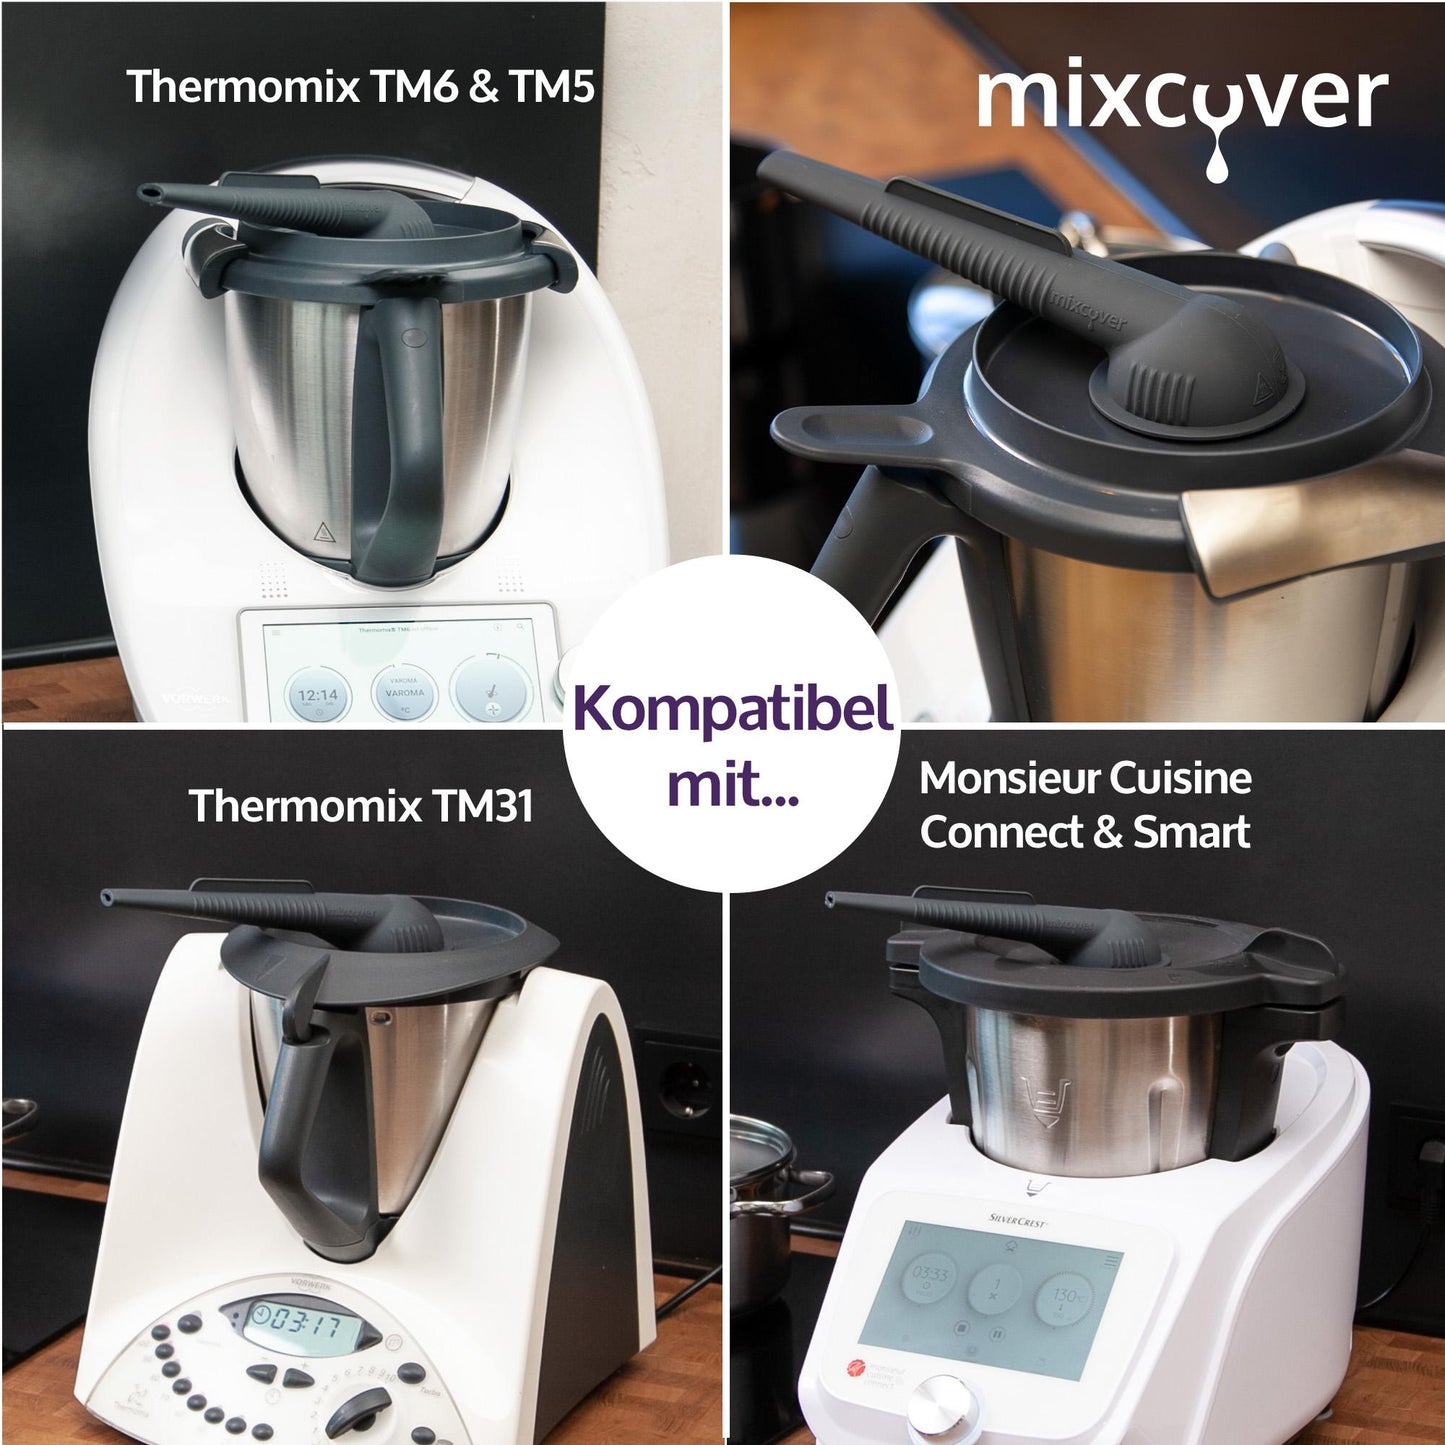 mixcover Steamy water vapor discount offset steam attachment extractoring mug furniture protection steam pipe made of silicone compatible with Thermomix TM6 TM5 TM31 Monsieur Cuisine Connect Monsieur Cuisine Smart